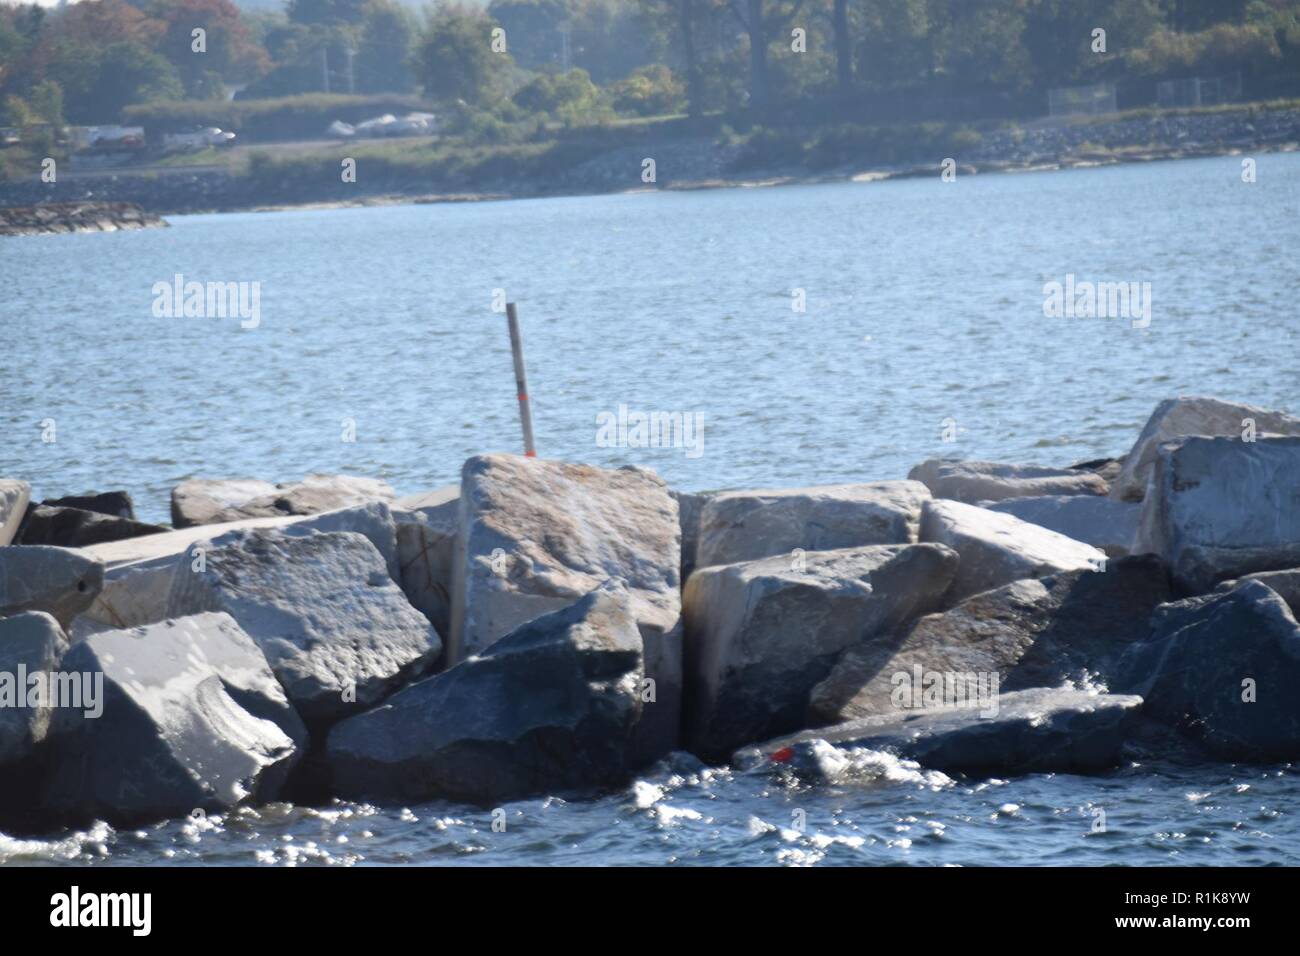 The west arrowhead breakwater at Oswego Harbor in Oswego, NY, October 10, 2018. The U.S. Army Corps of Engineers, Buffalo District is repairing 600 feet of the breakwater using armor stone in the 12-20 ton range. The repairs are critical to providing safe navigation and supports the local and national economies. Stock Photo